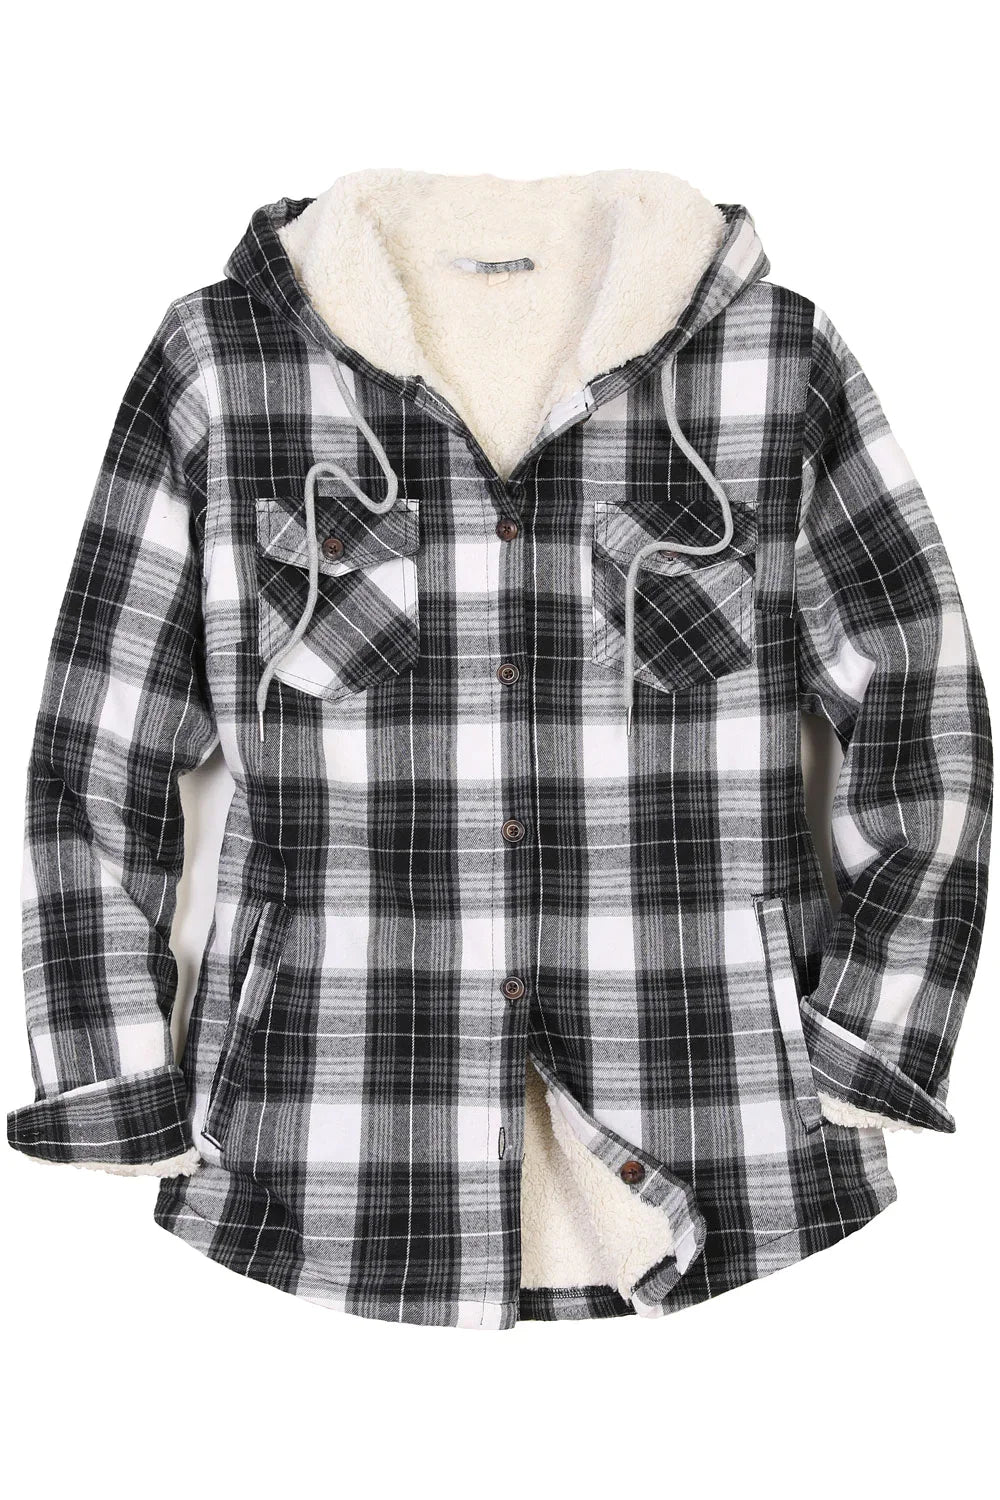 Matching Family Outfits - Women's Black White Flannel Jacket with Hood ...